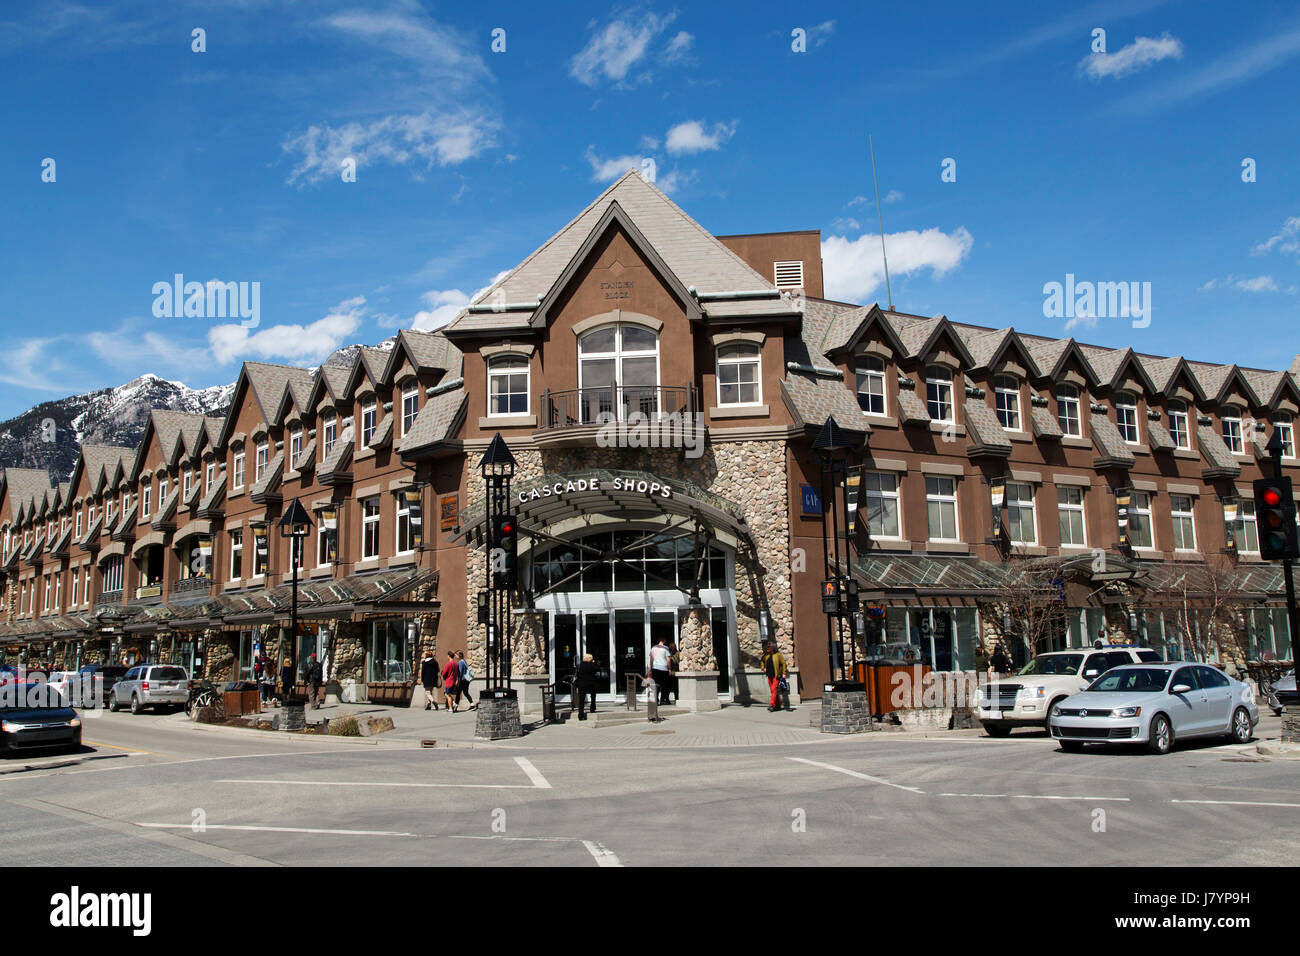 Facade of the Cascade Shops in Banff, Canada. It os one of several shopping centres in the town. Stock Photo